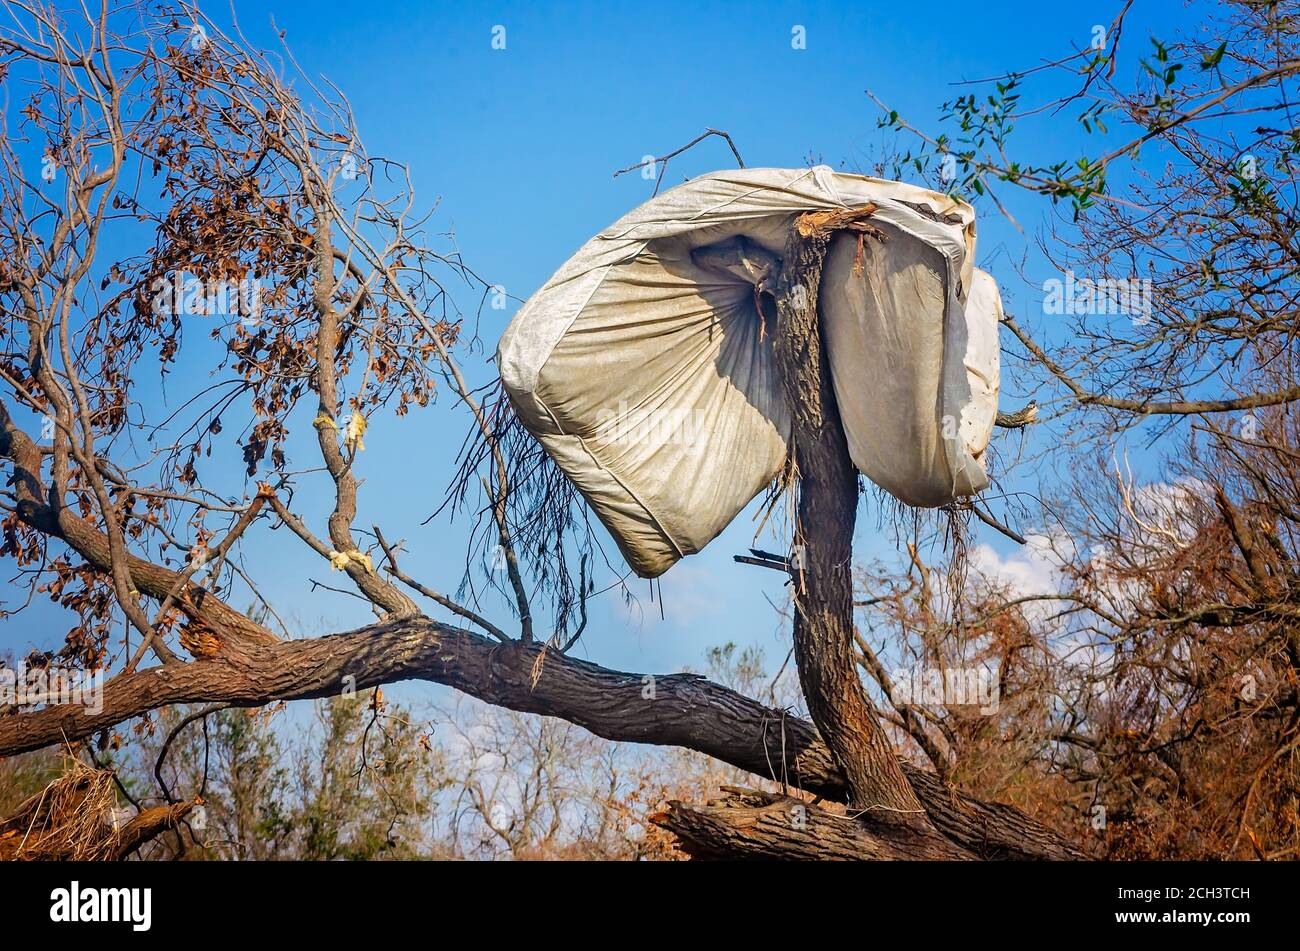 A mattress hangs from a tree after Hurricane Laura, Sept. 11, 2020, in Cameron, Louisiana. The town sustained heavy damage in the hurricane. Stock Photo